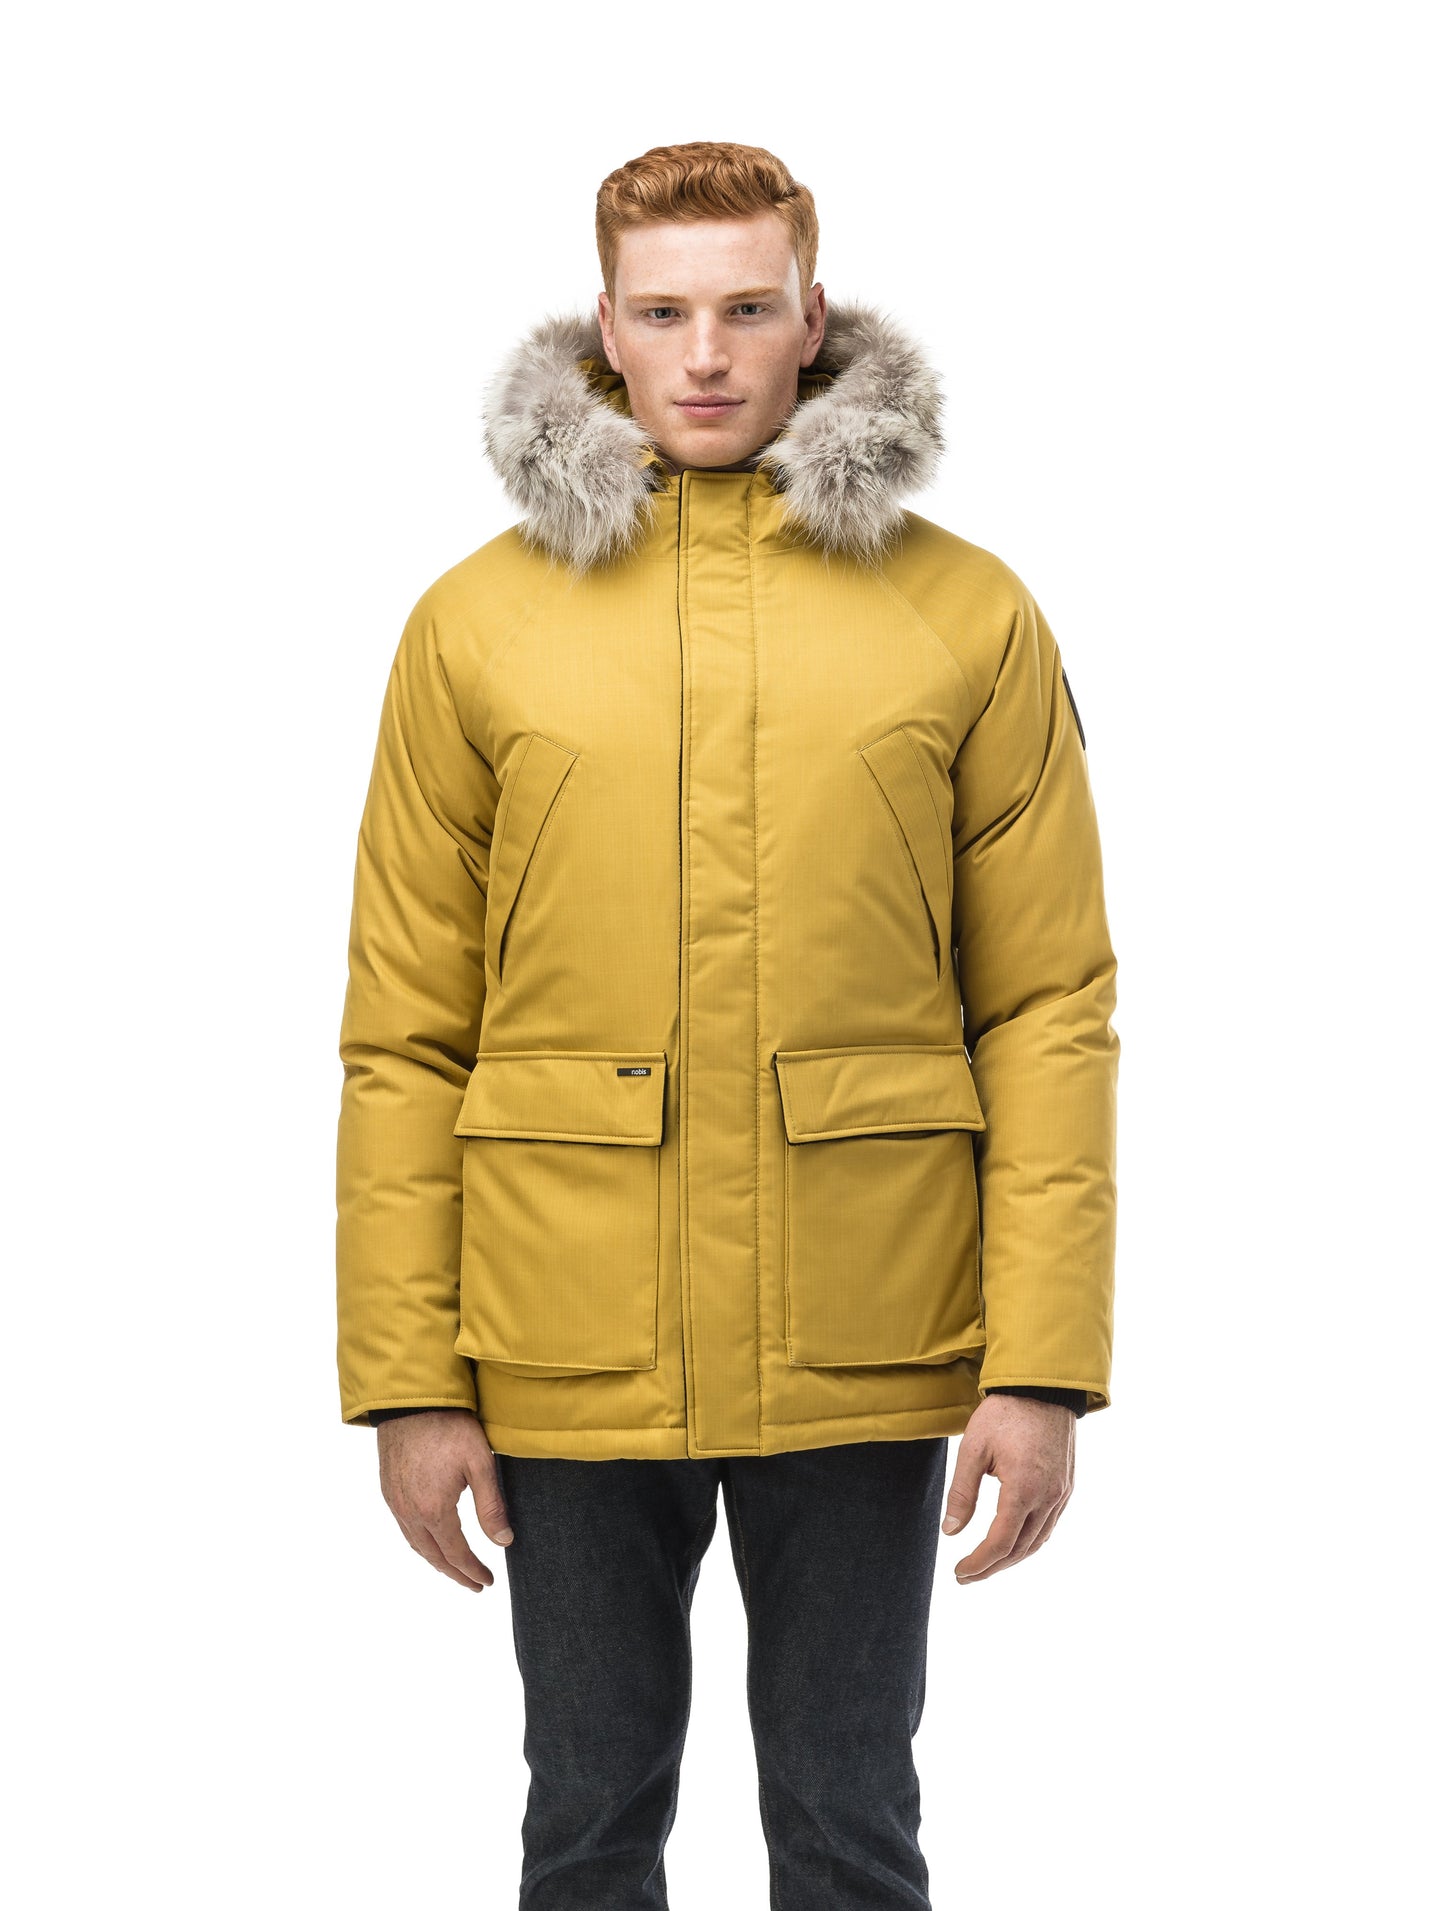 Men's waist length down filled jacket with two front pockets with magnetic closure and a removable fur trim on the hood in CH Yellow